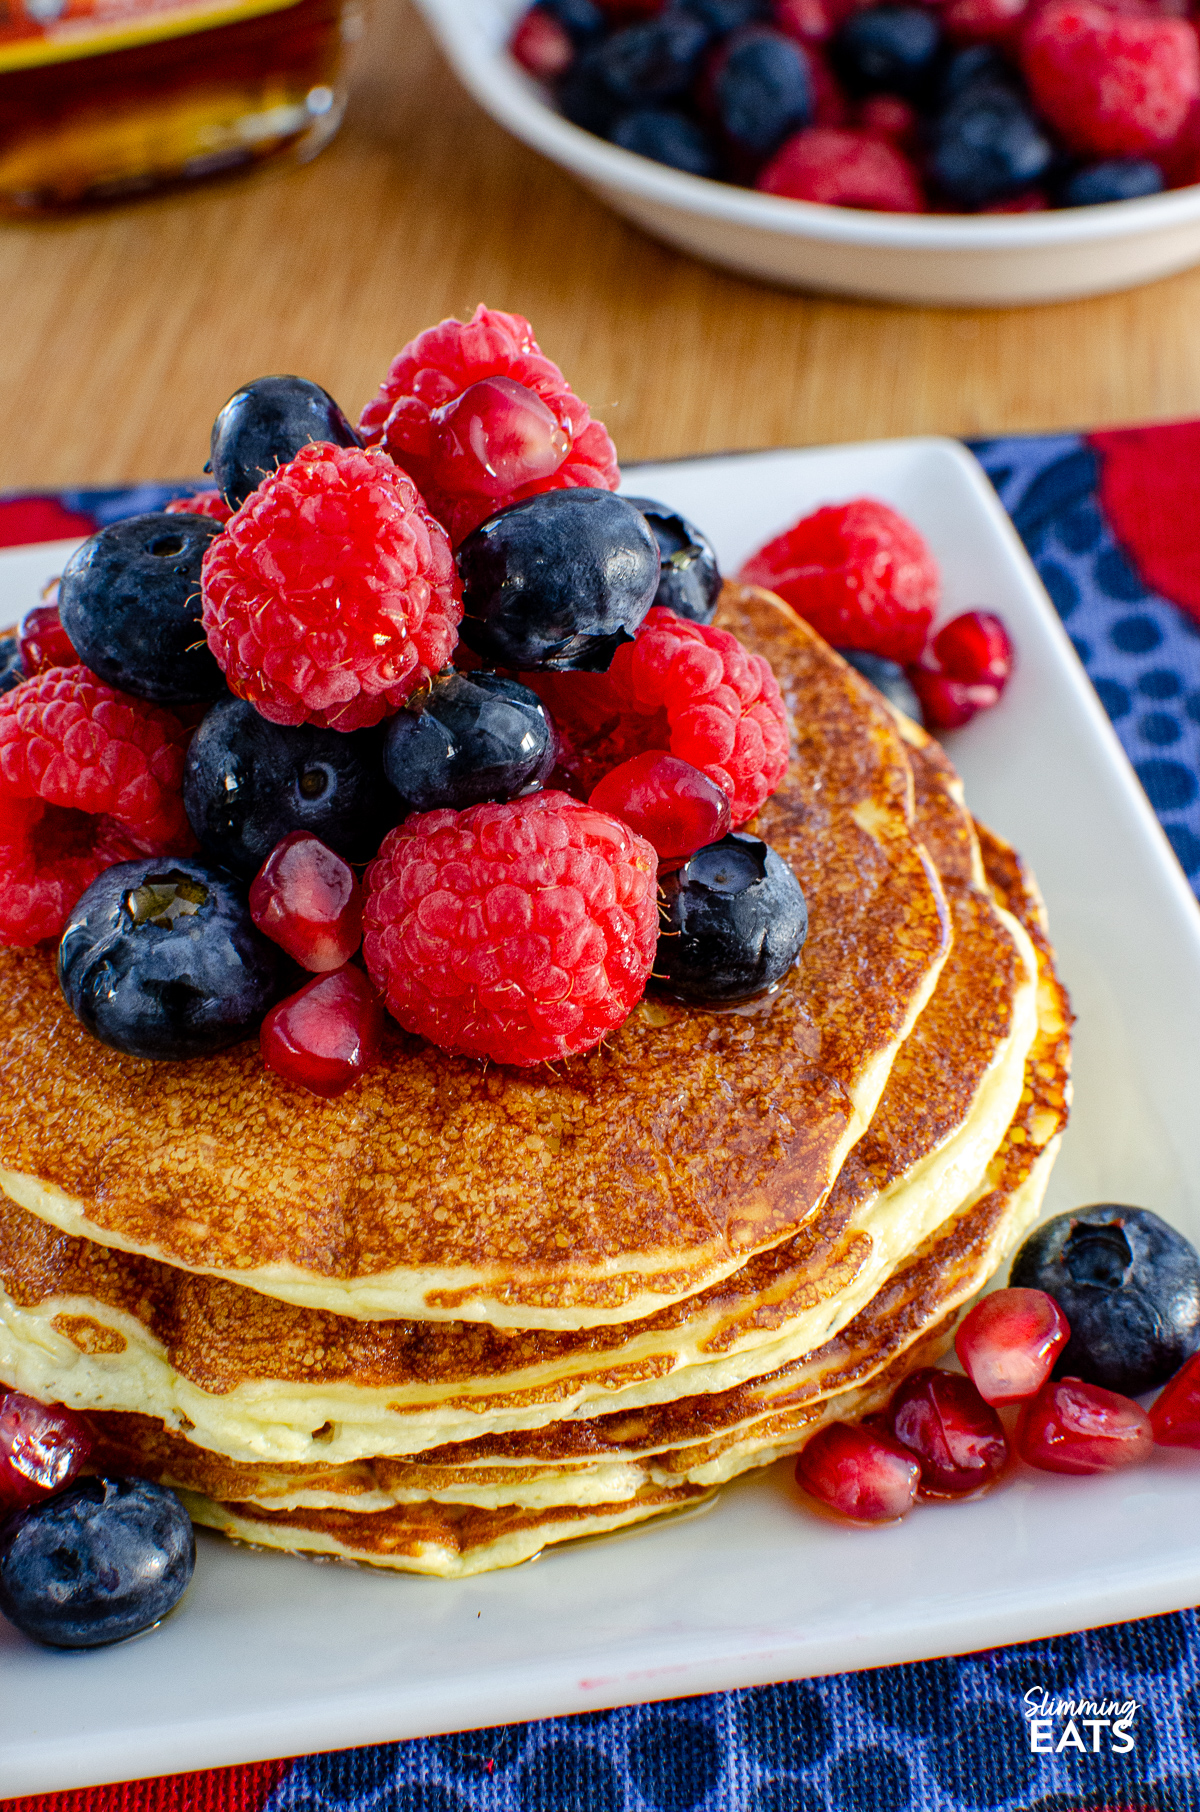 High Protein Cottage Cheese Pancakes served on a white plate, garnished with a variety of mixed berries and a light drizzle of maple syrup, with a bottle of maple syrup and additional berries in the background.